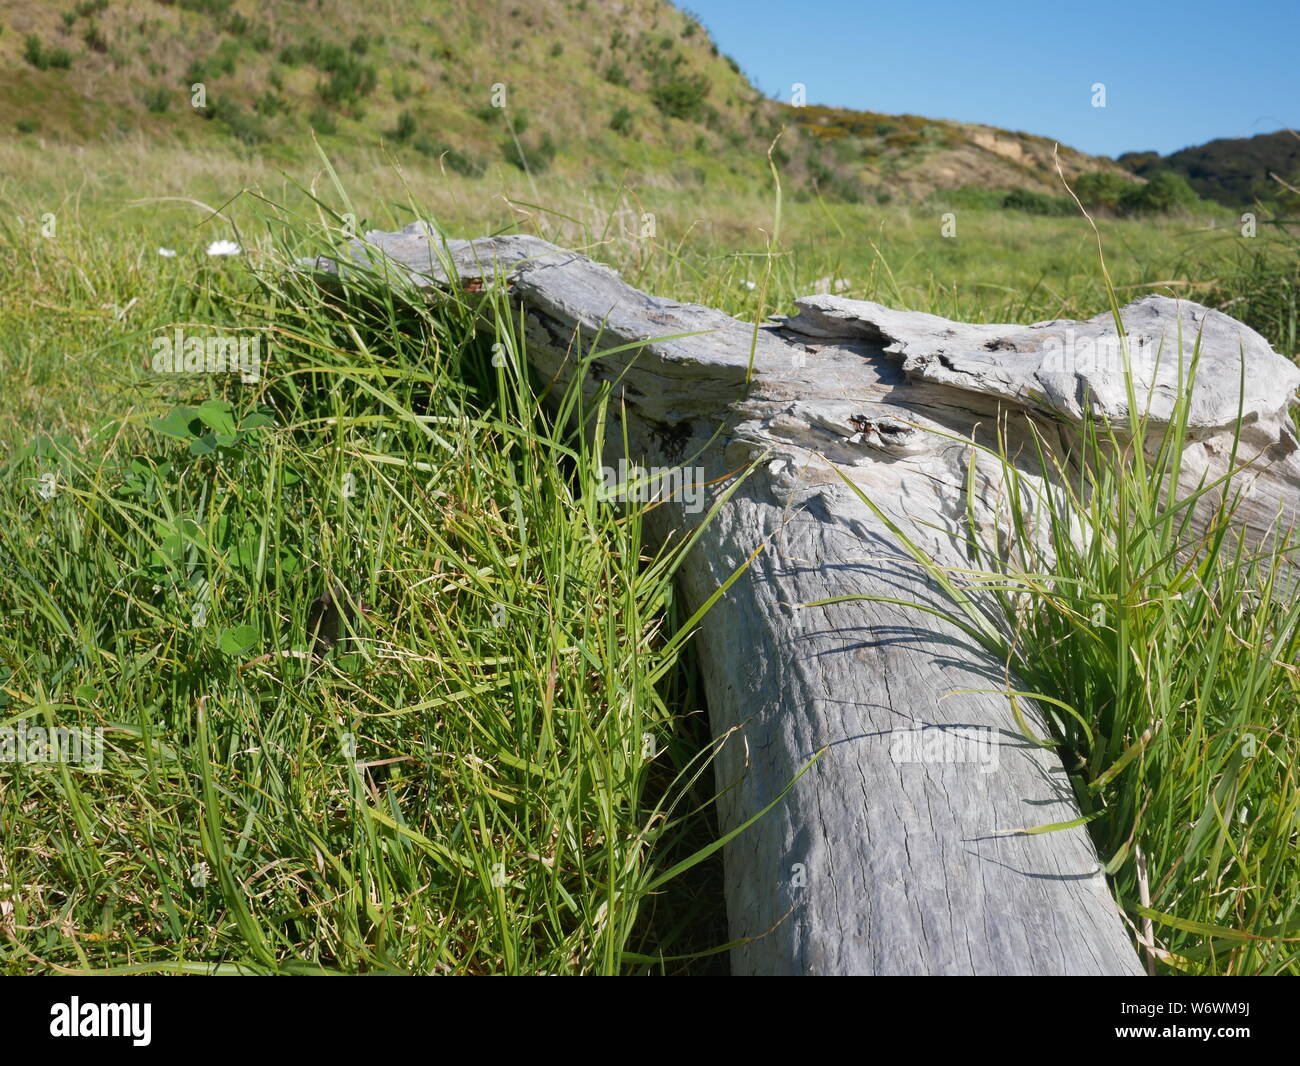 Drift wood lying in grass in foreground, blue sky and  green hills in distance. Stock Photo